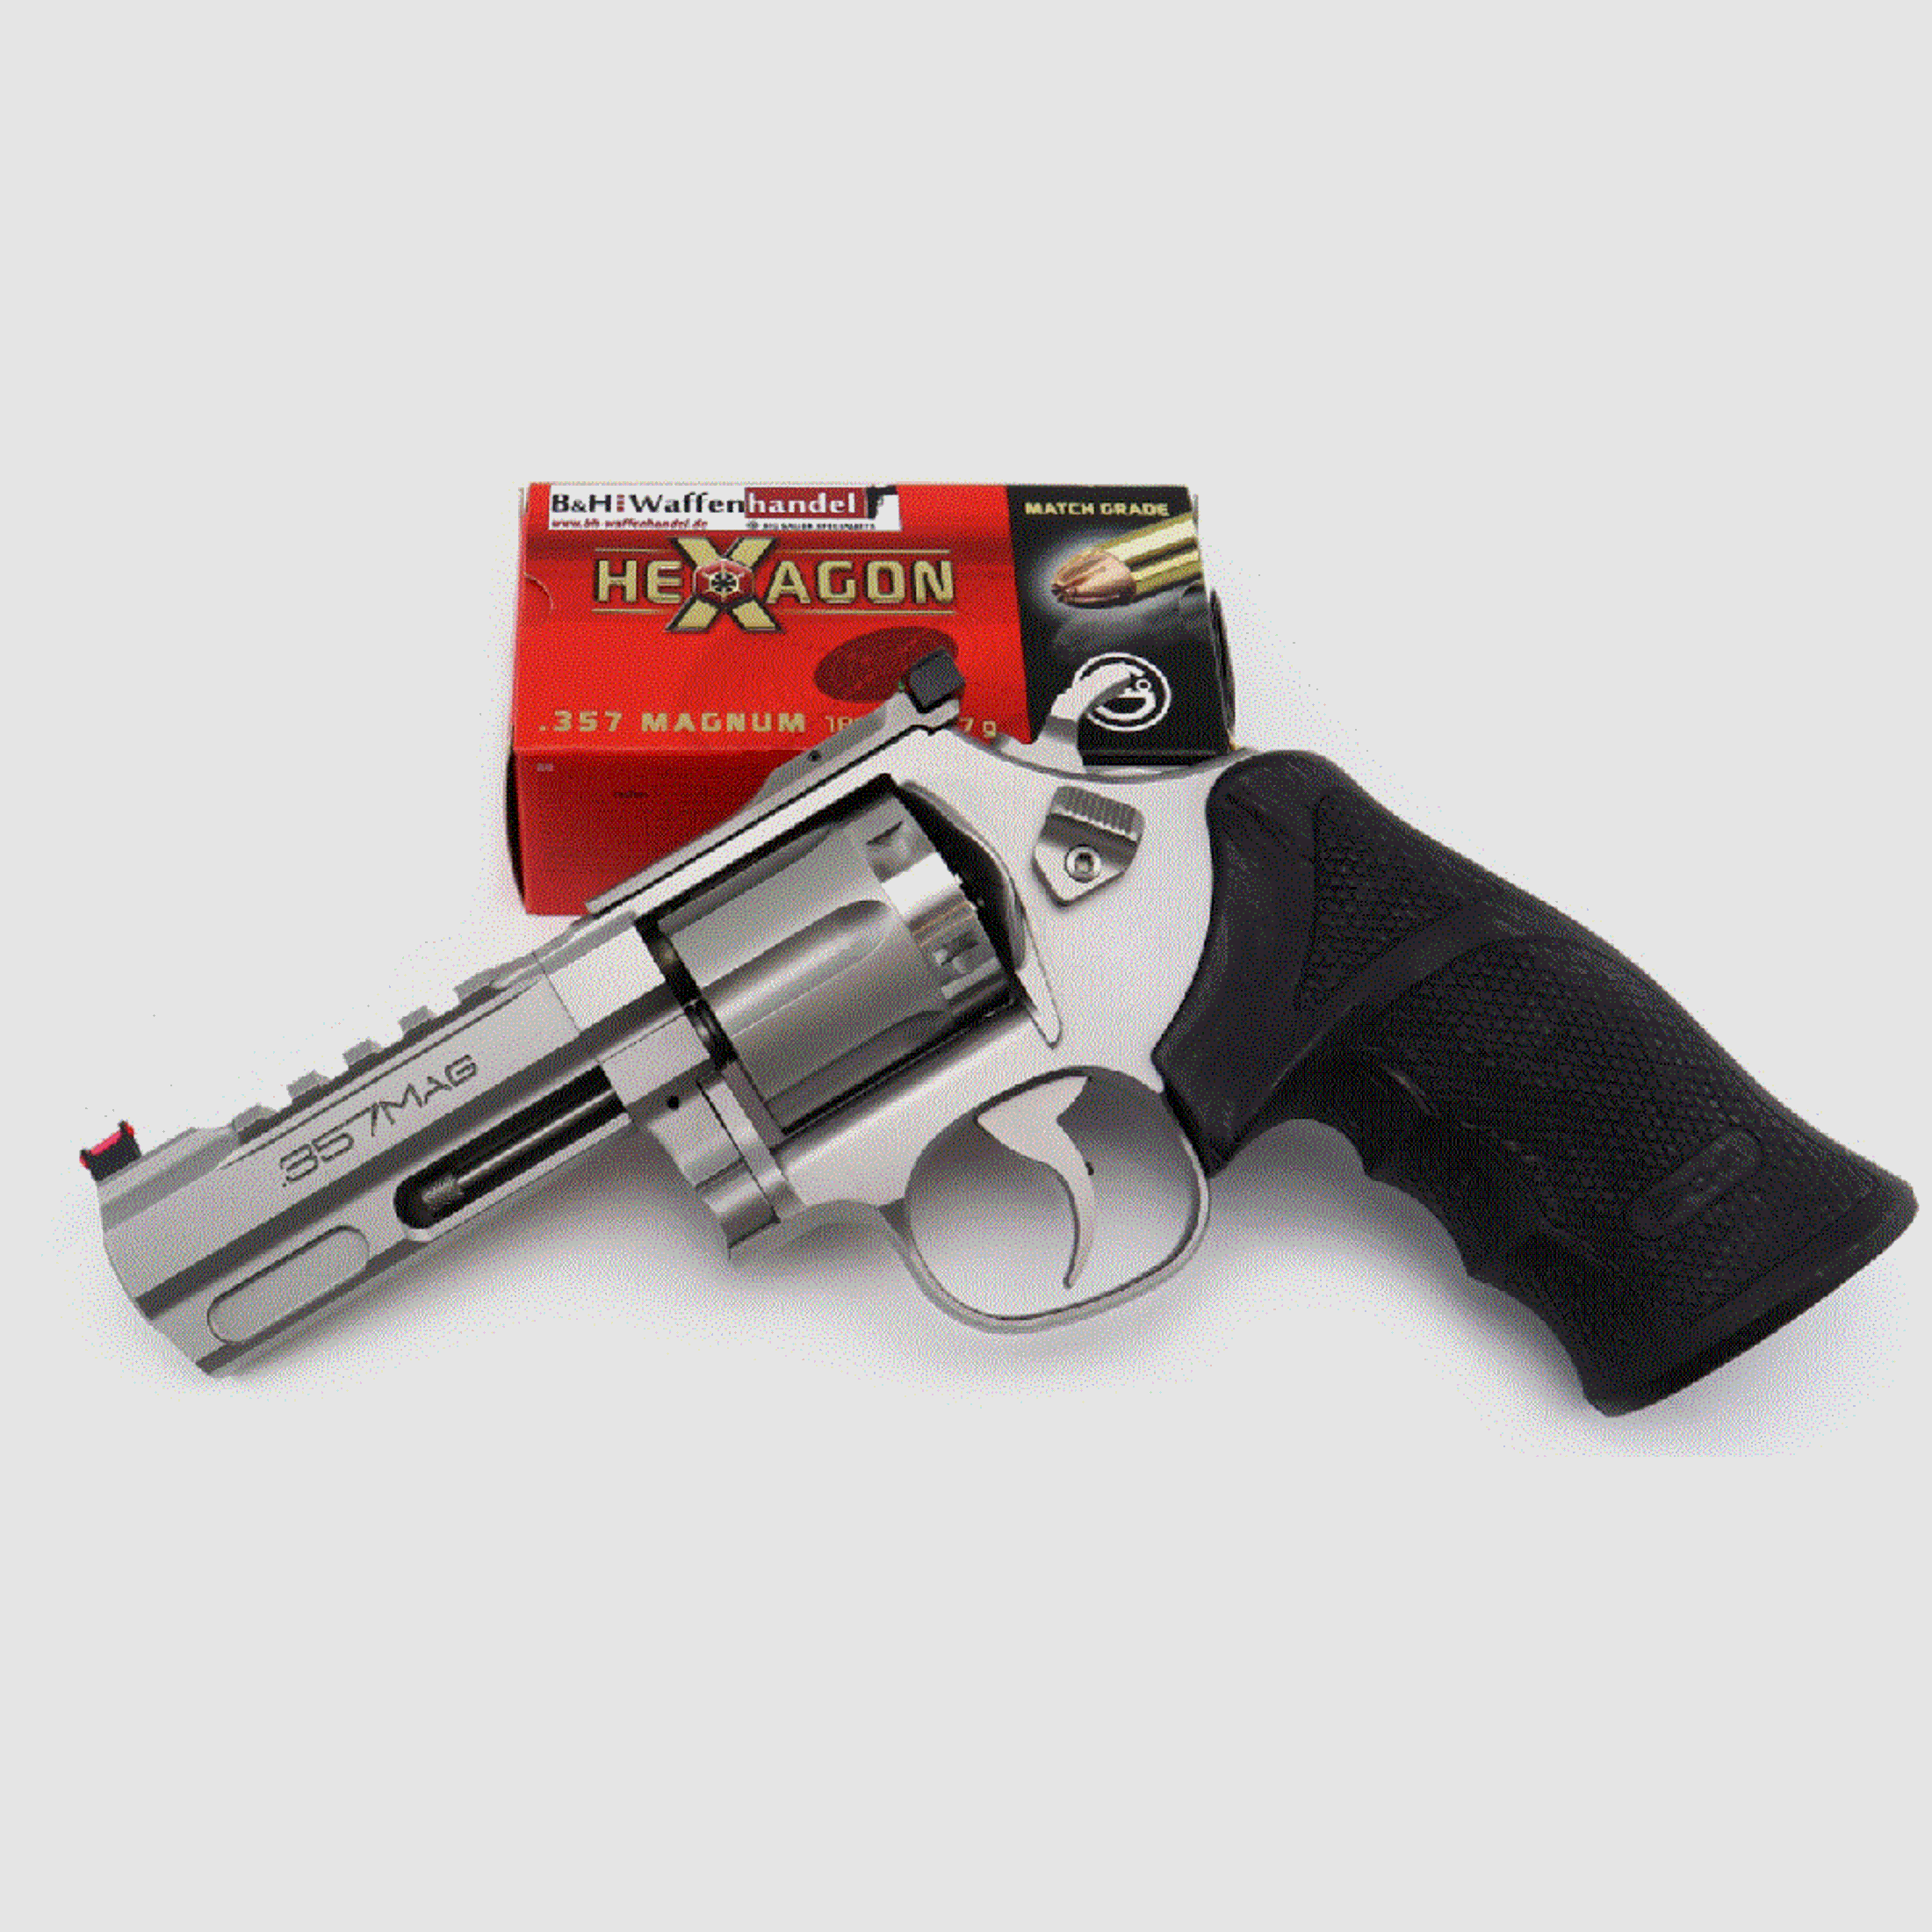 Spohr 284 Carry stainless, .357 Magnum